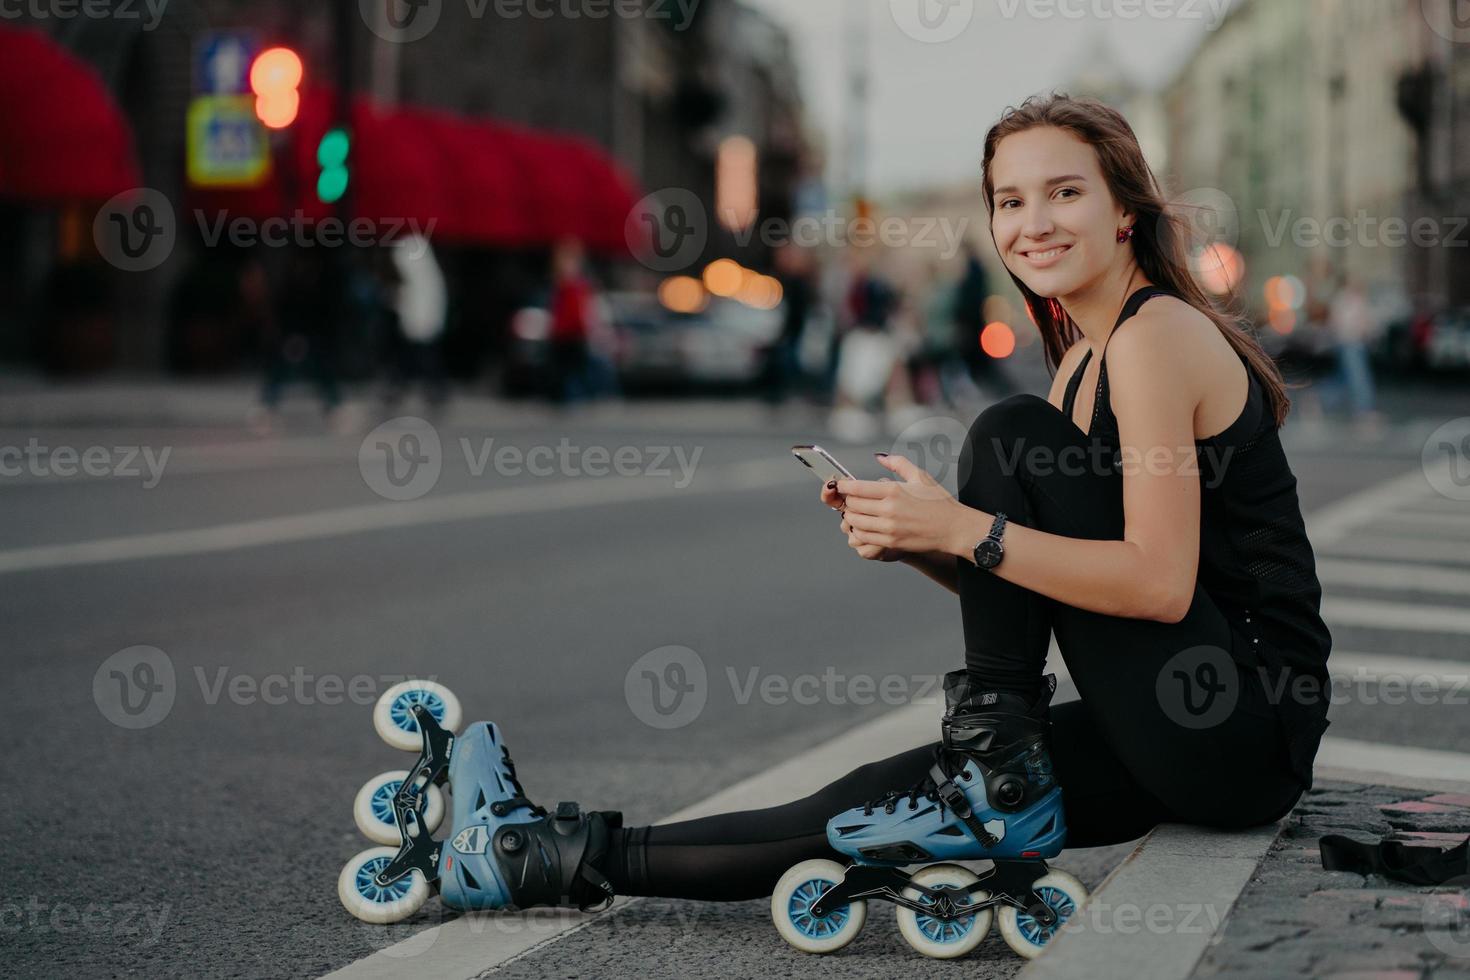 People outdoor activities and recreation concept. Horizontal shot of active slim woman being in good physical shape rides rollerblades uses smartphone sends text messages online poses outside photo